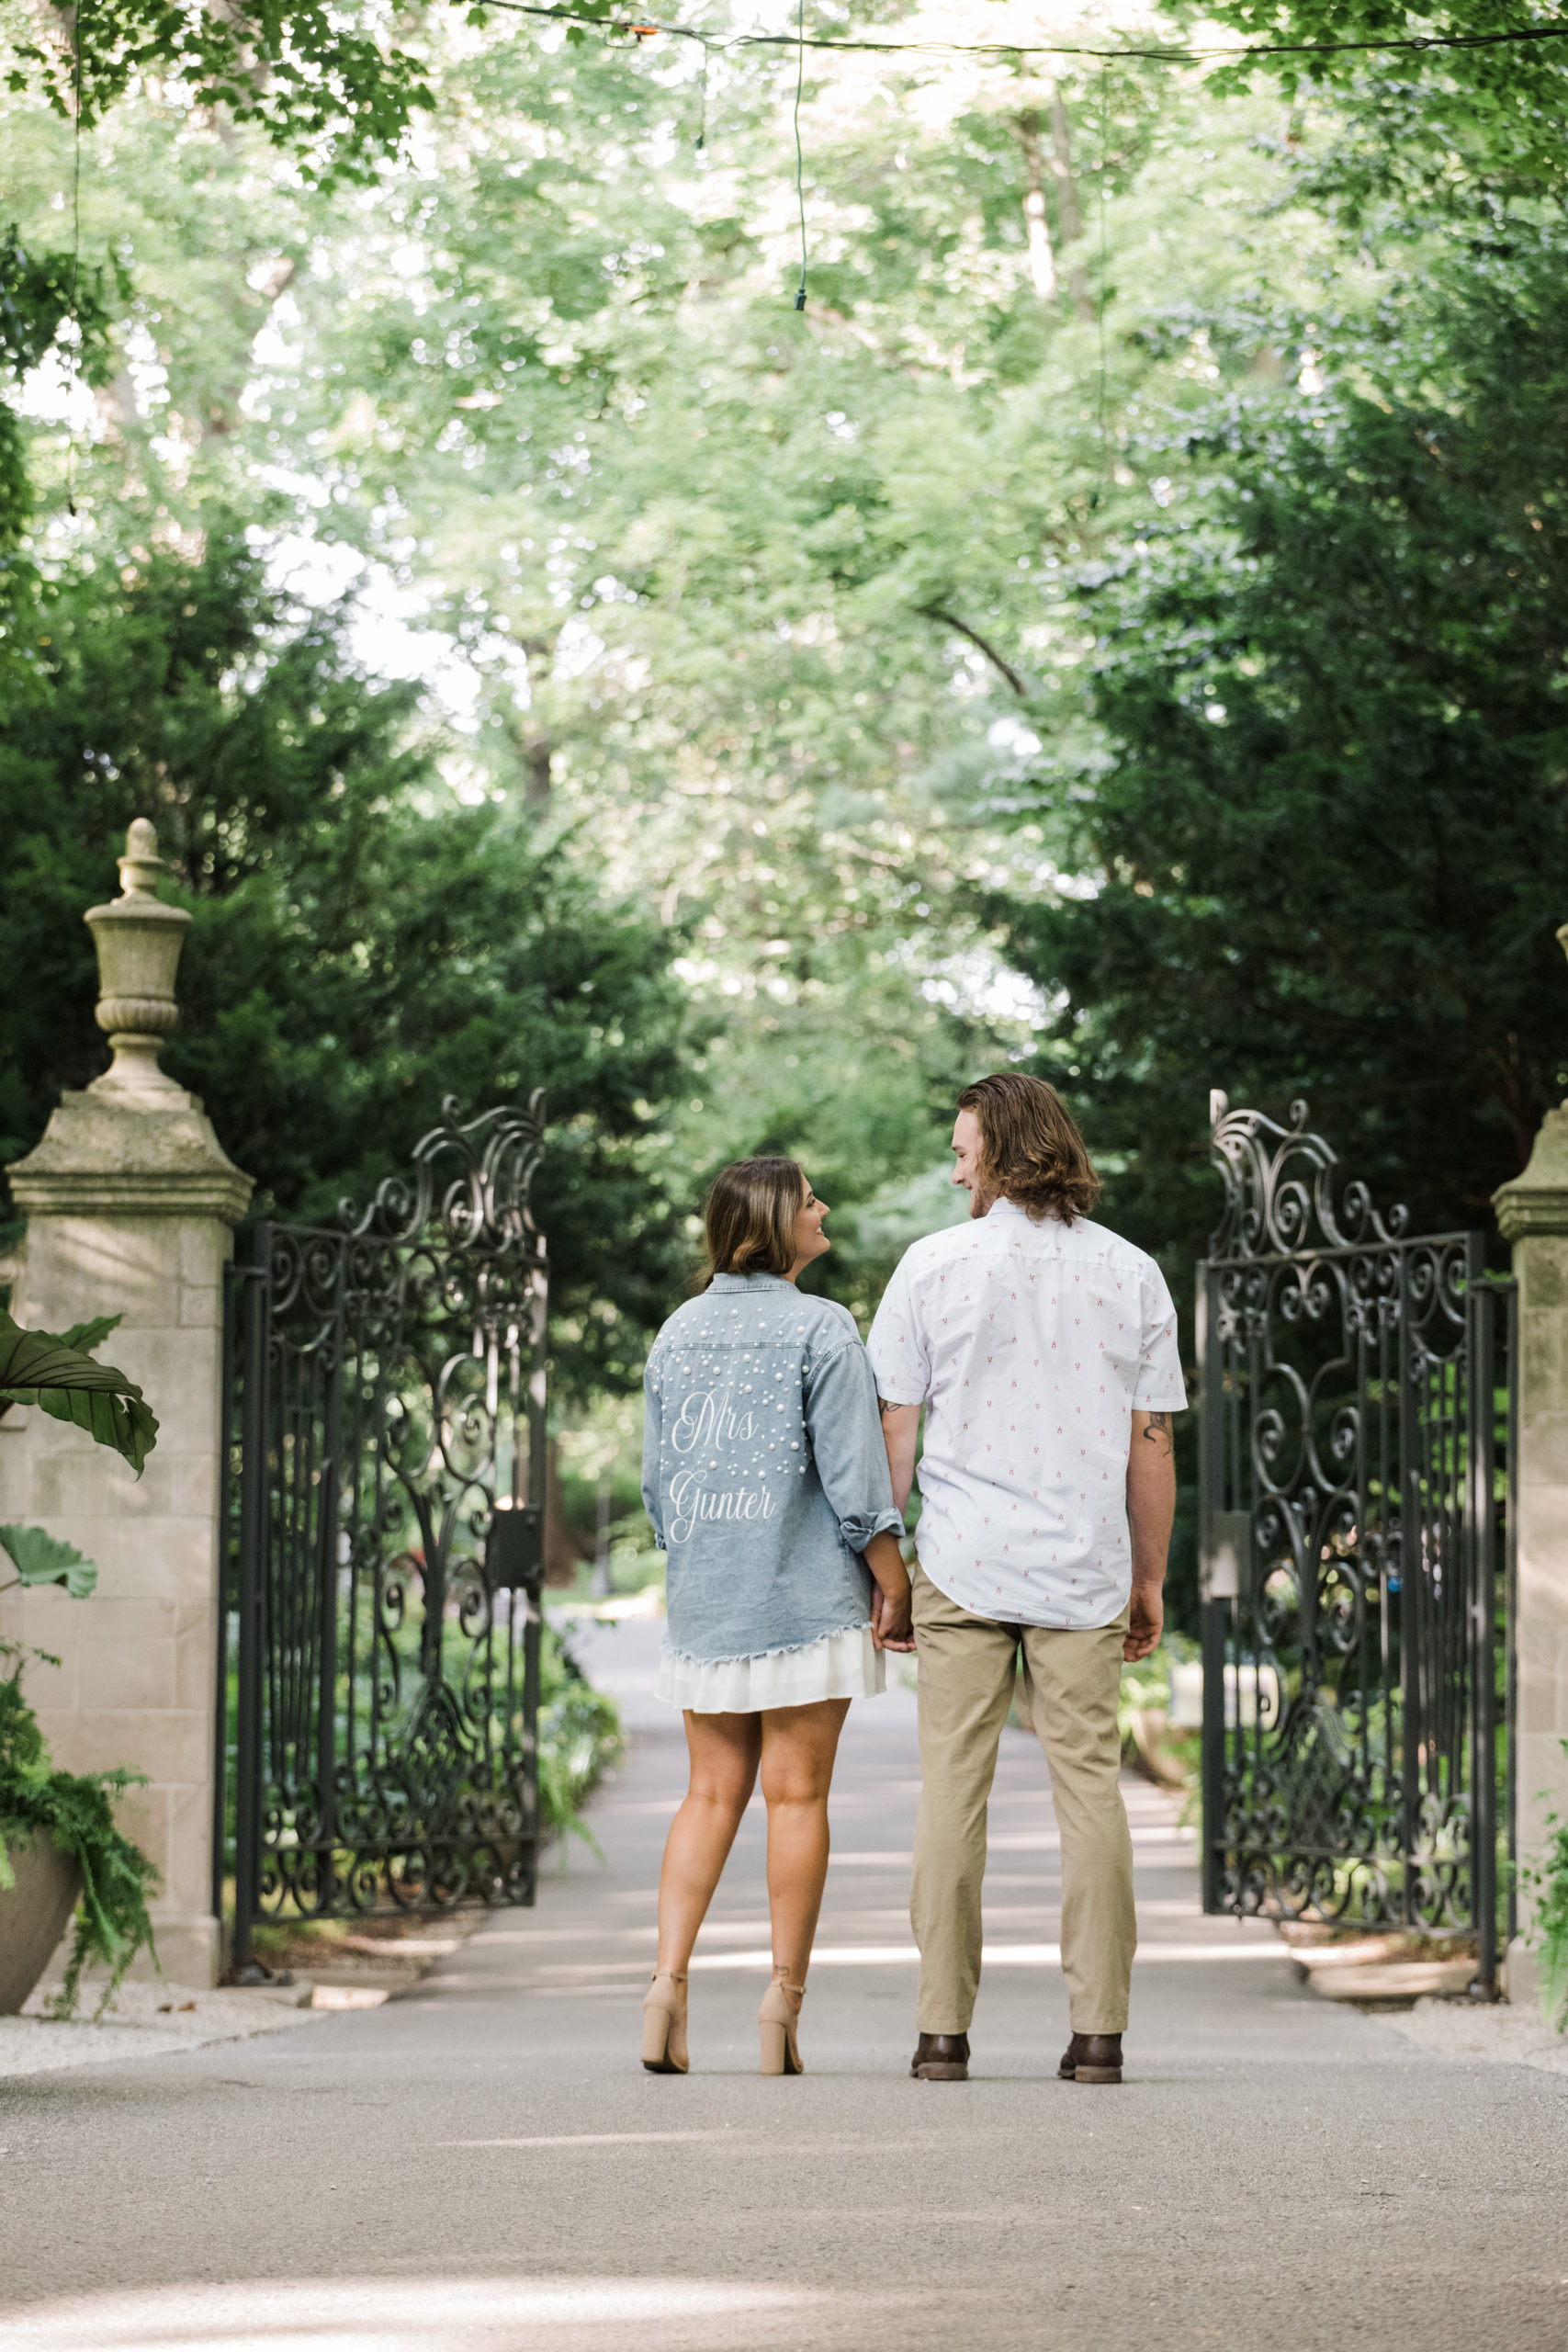 A personalized denim pearl embellished shirt or jacket is the perfect accessory for your engagement session.